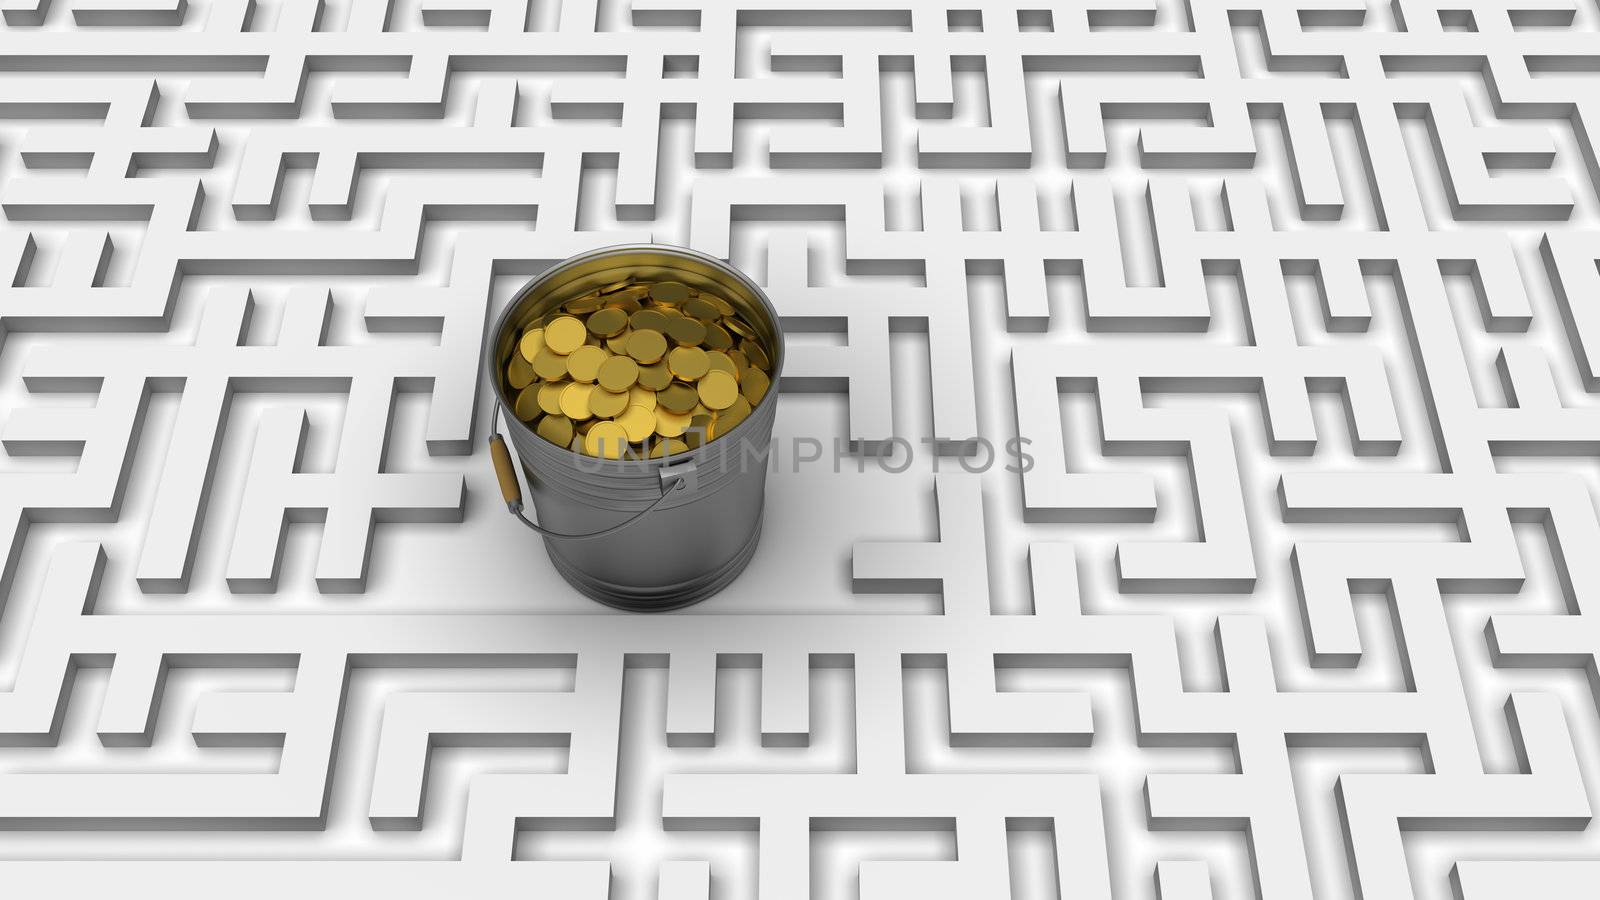 Conceptual business background: Coins in the bucket in center of labyrinth.